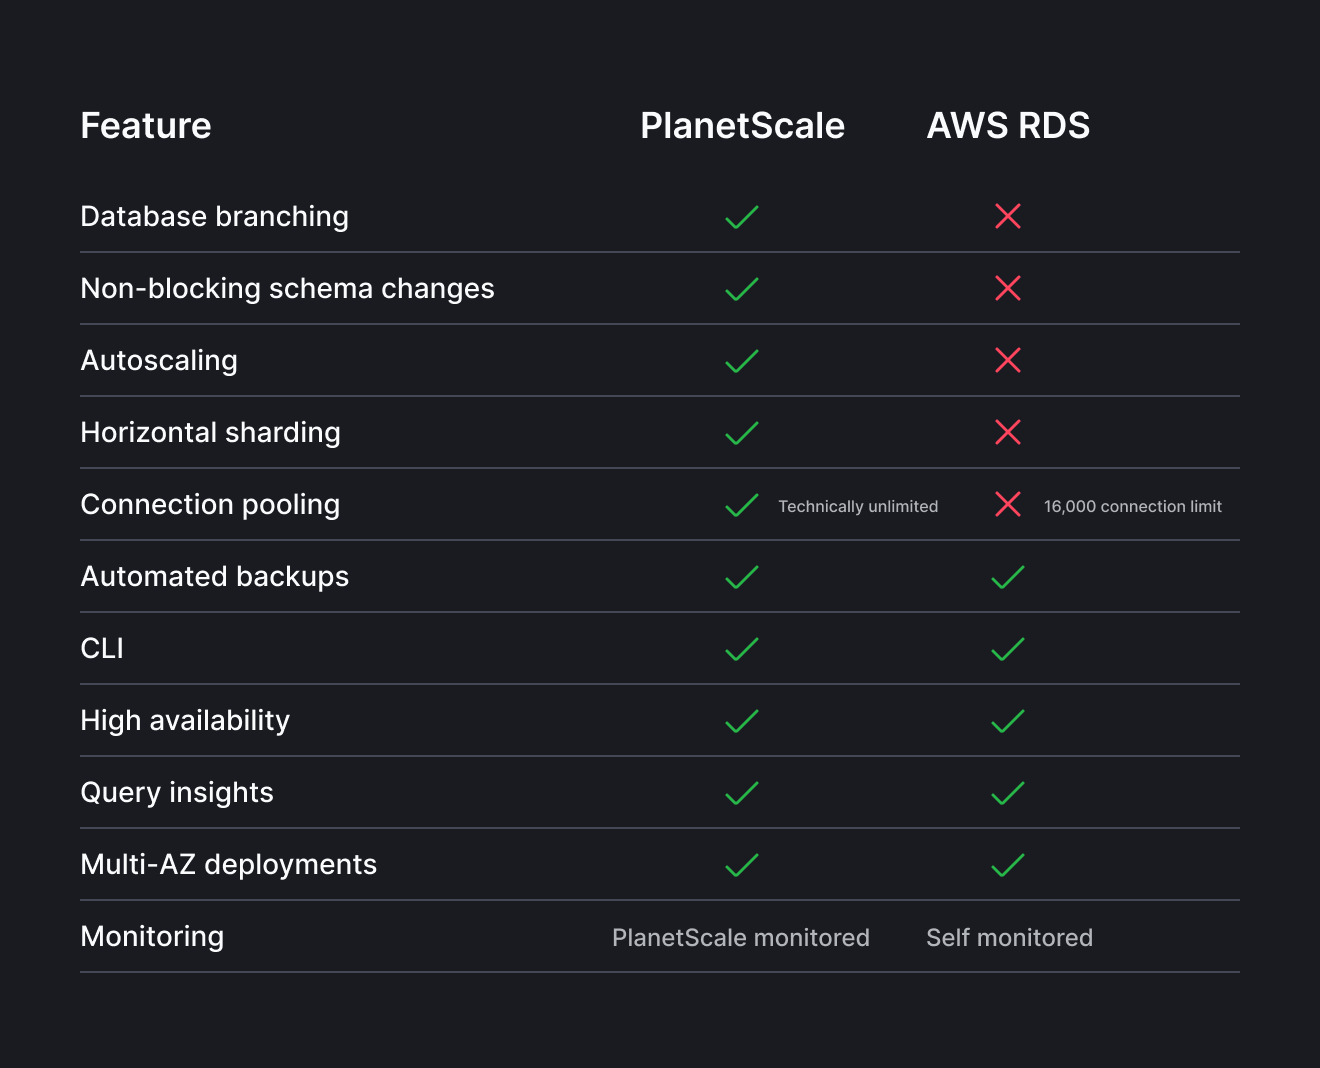 Table of features comparing AWS RDS to PlanetScale